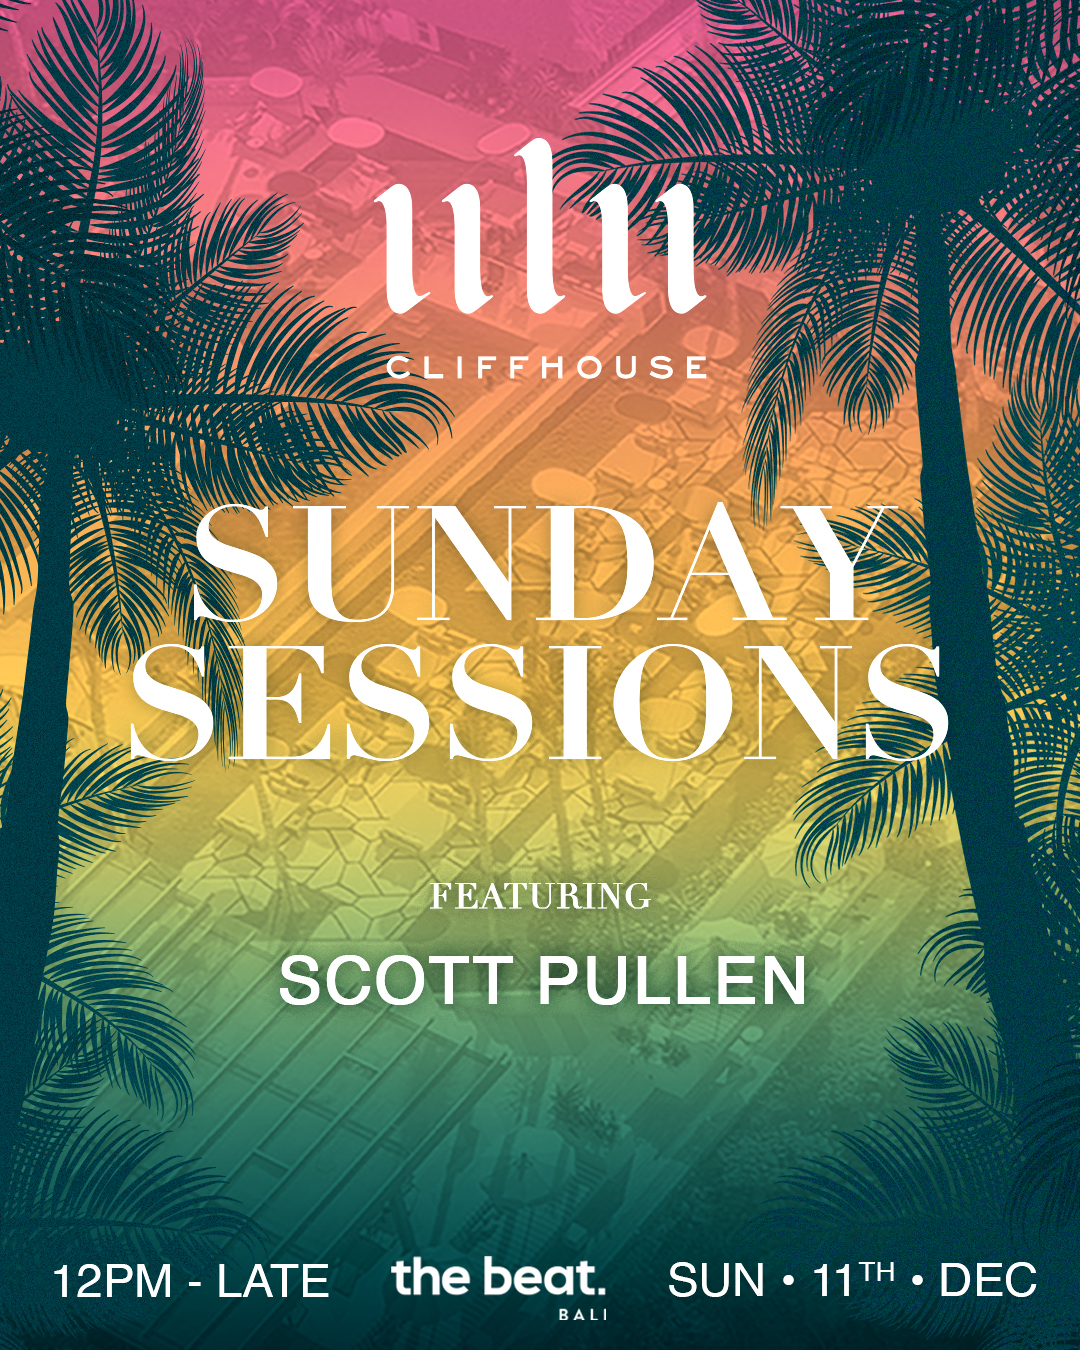 SUNDAY SESSIONS AT ULU CLIFFHOUSE – DECEMBER 11TH thumbnail image